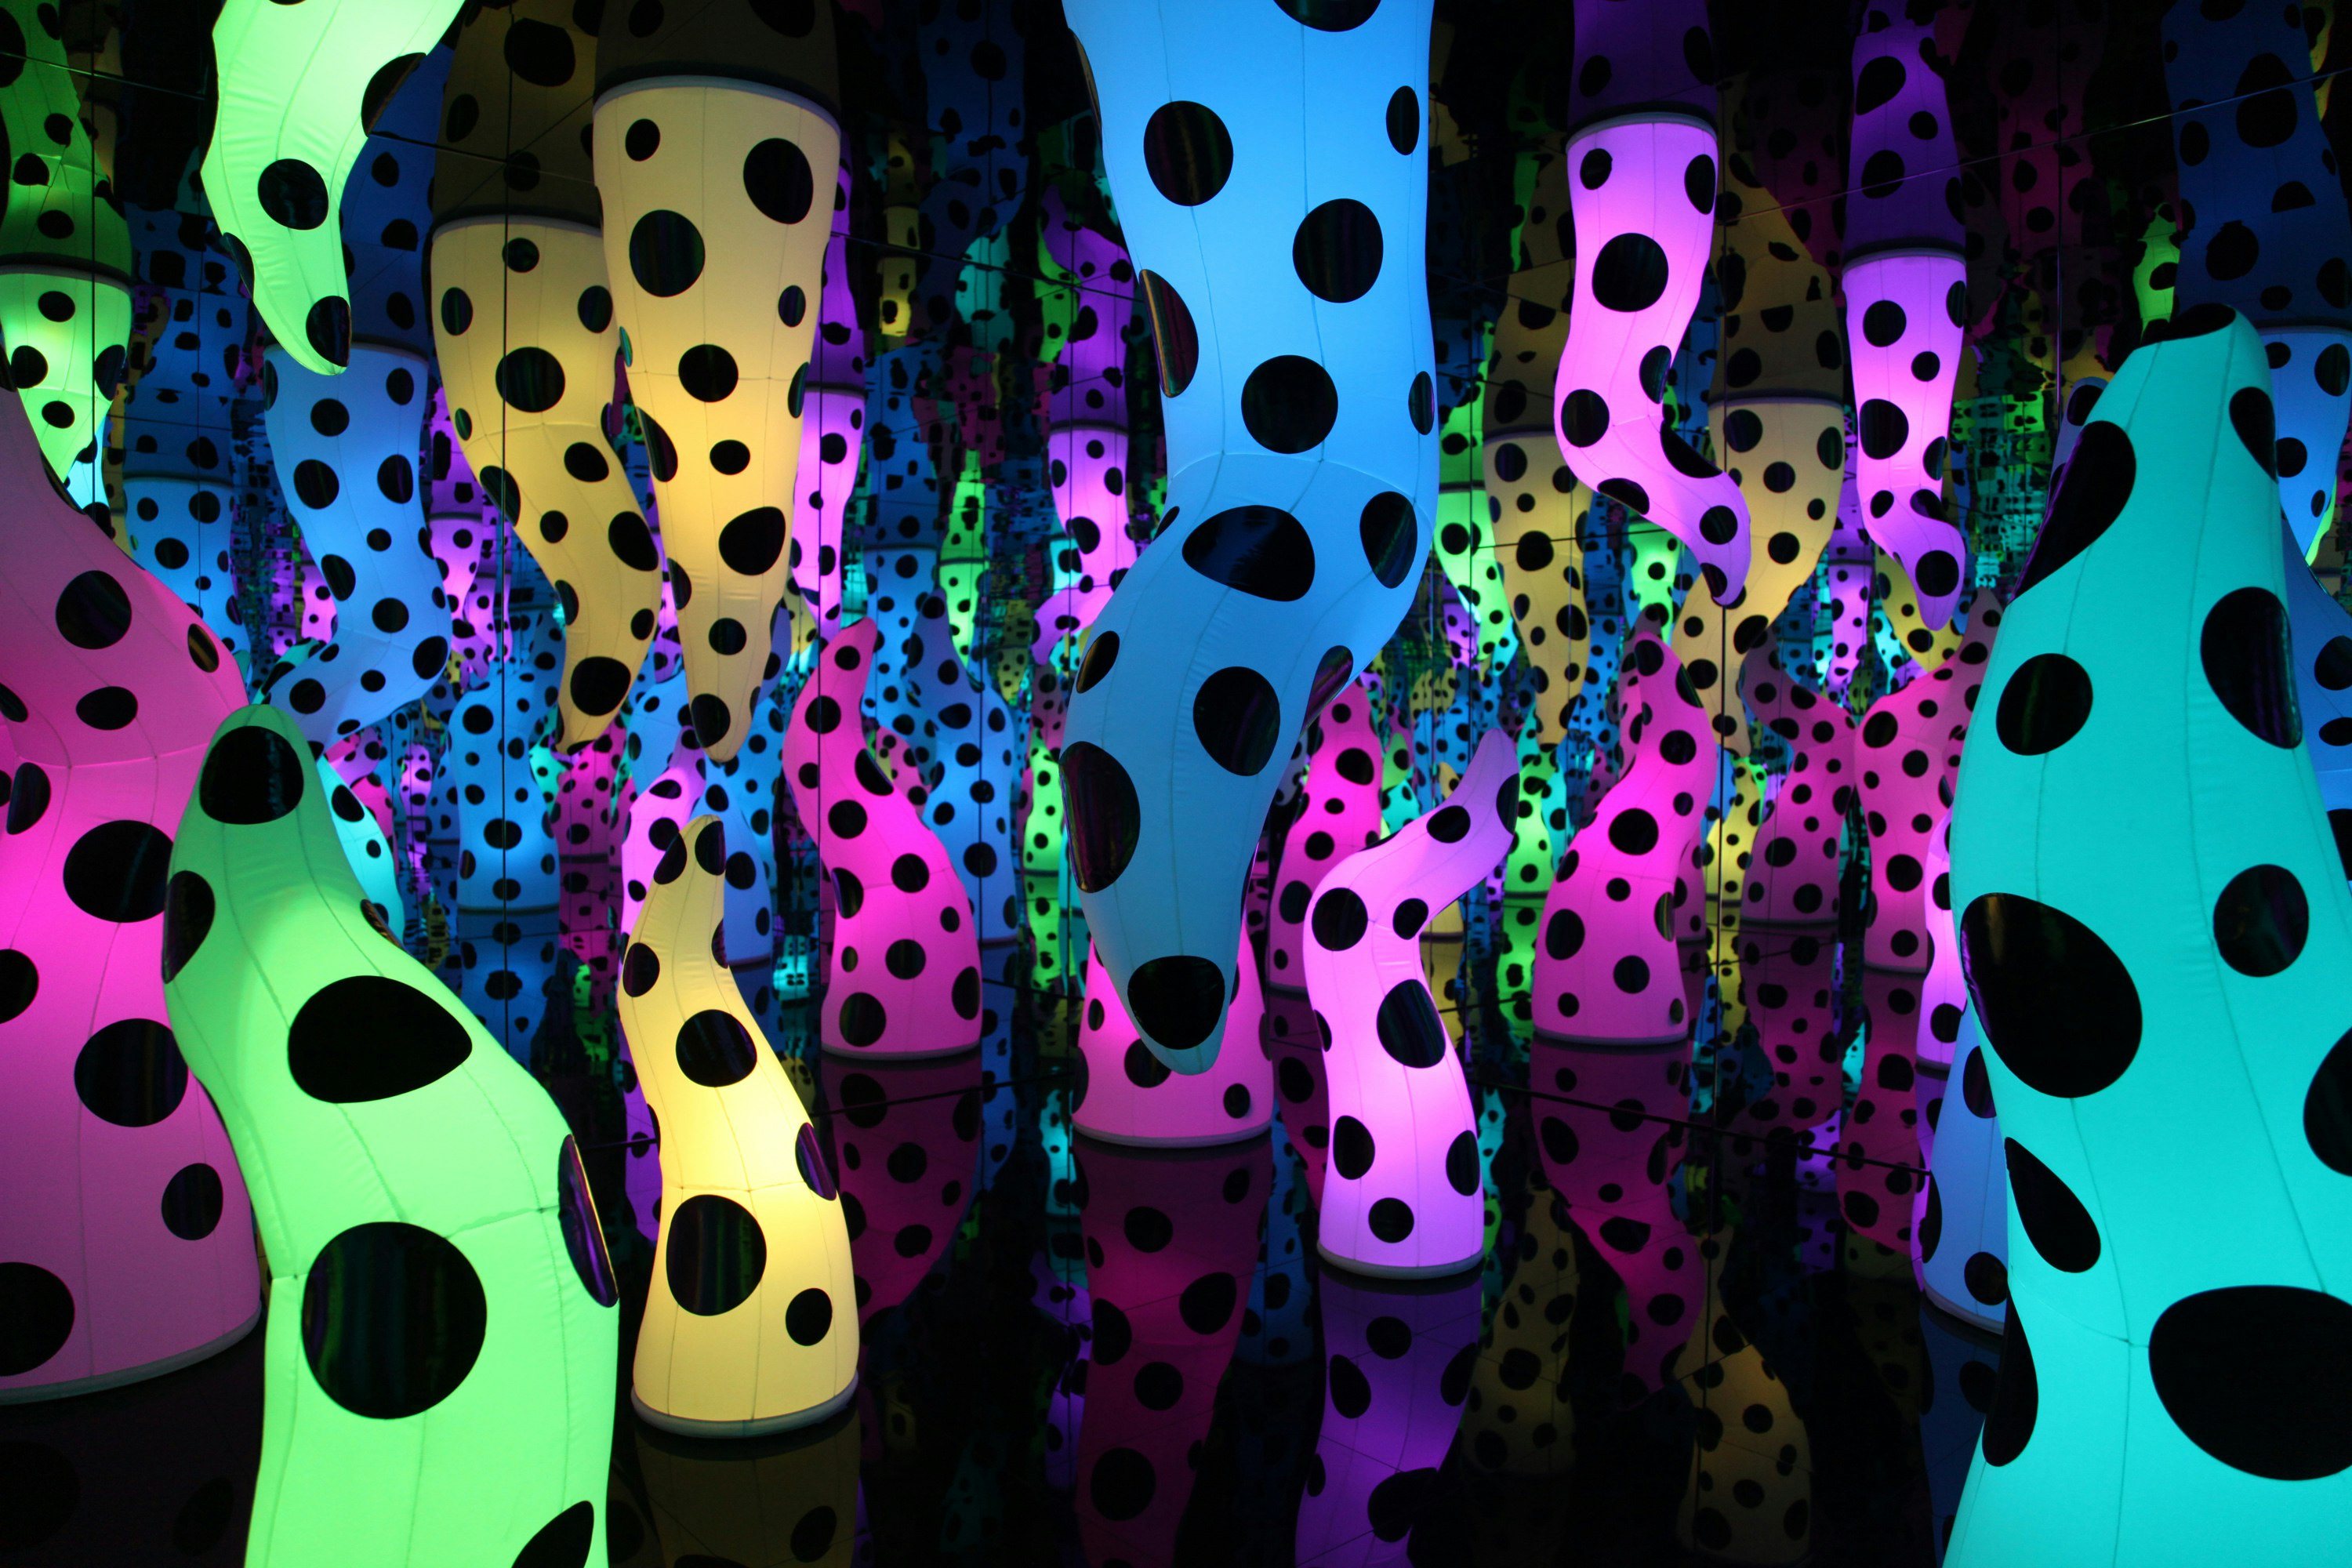 Yayoi Kusama’s “LOVE IS CALLING” installation, with multicolored, polka-dotted pieces that look like stalactites and stalagmites